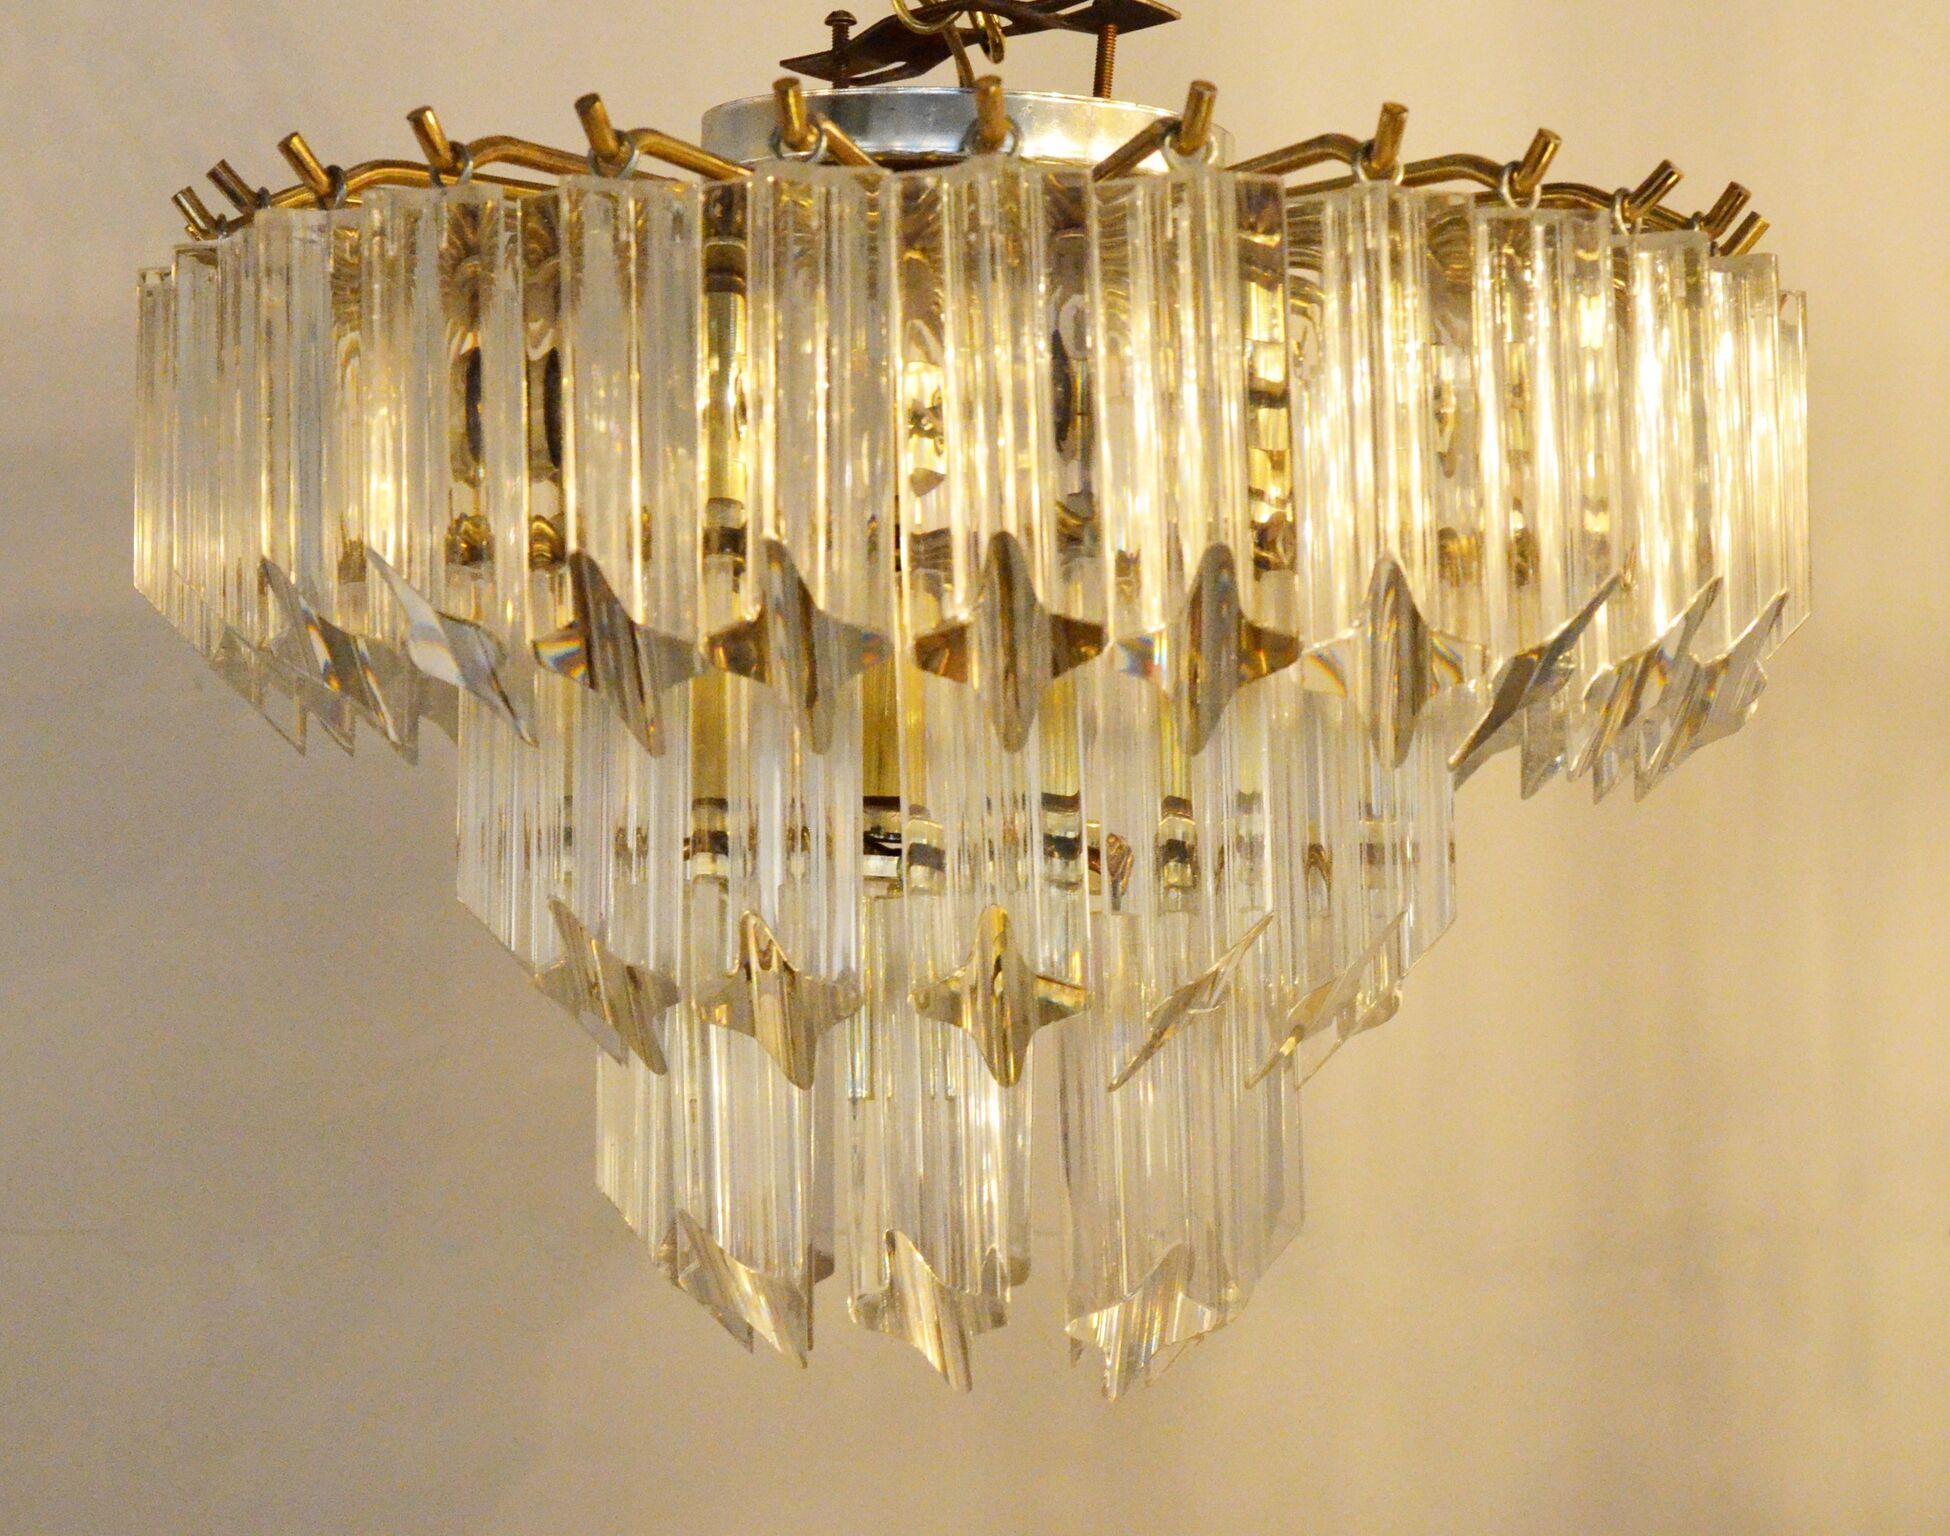 Offered is a Mid-Century Modern hanging lucite triad prisms and brass flushmount 